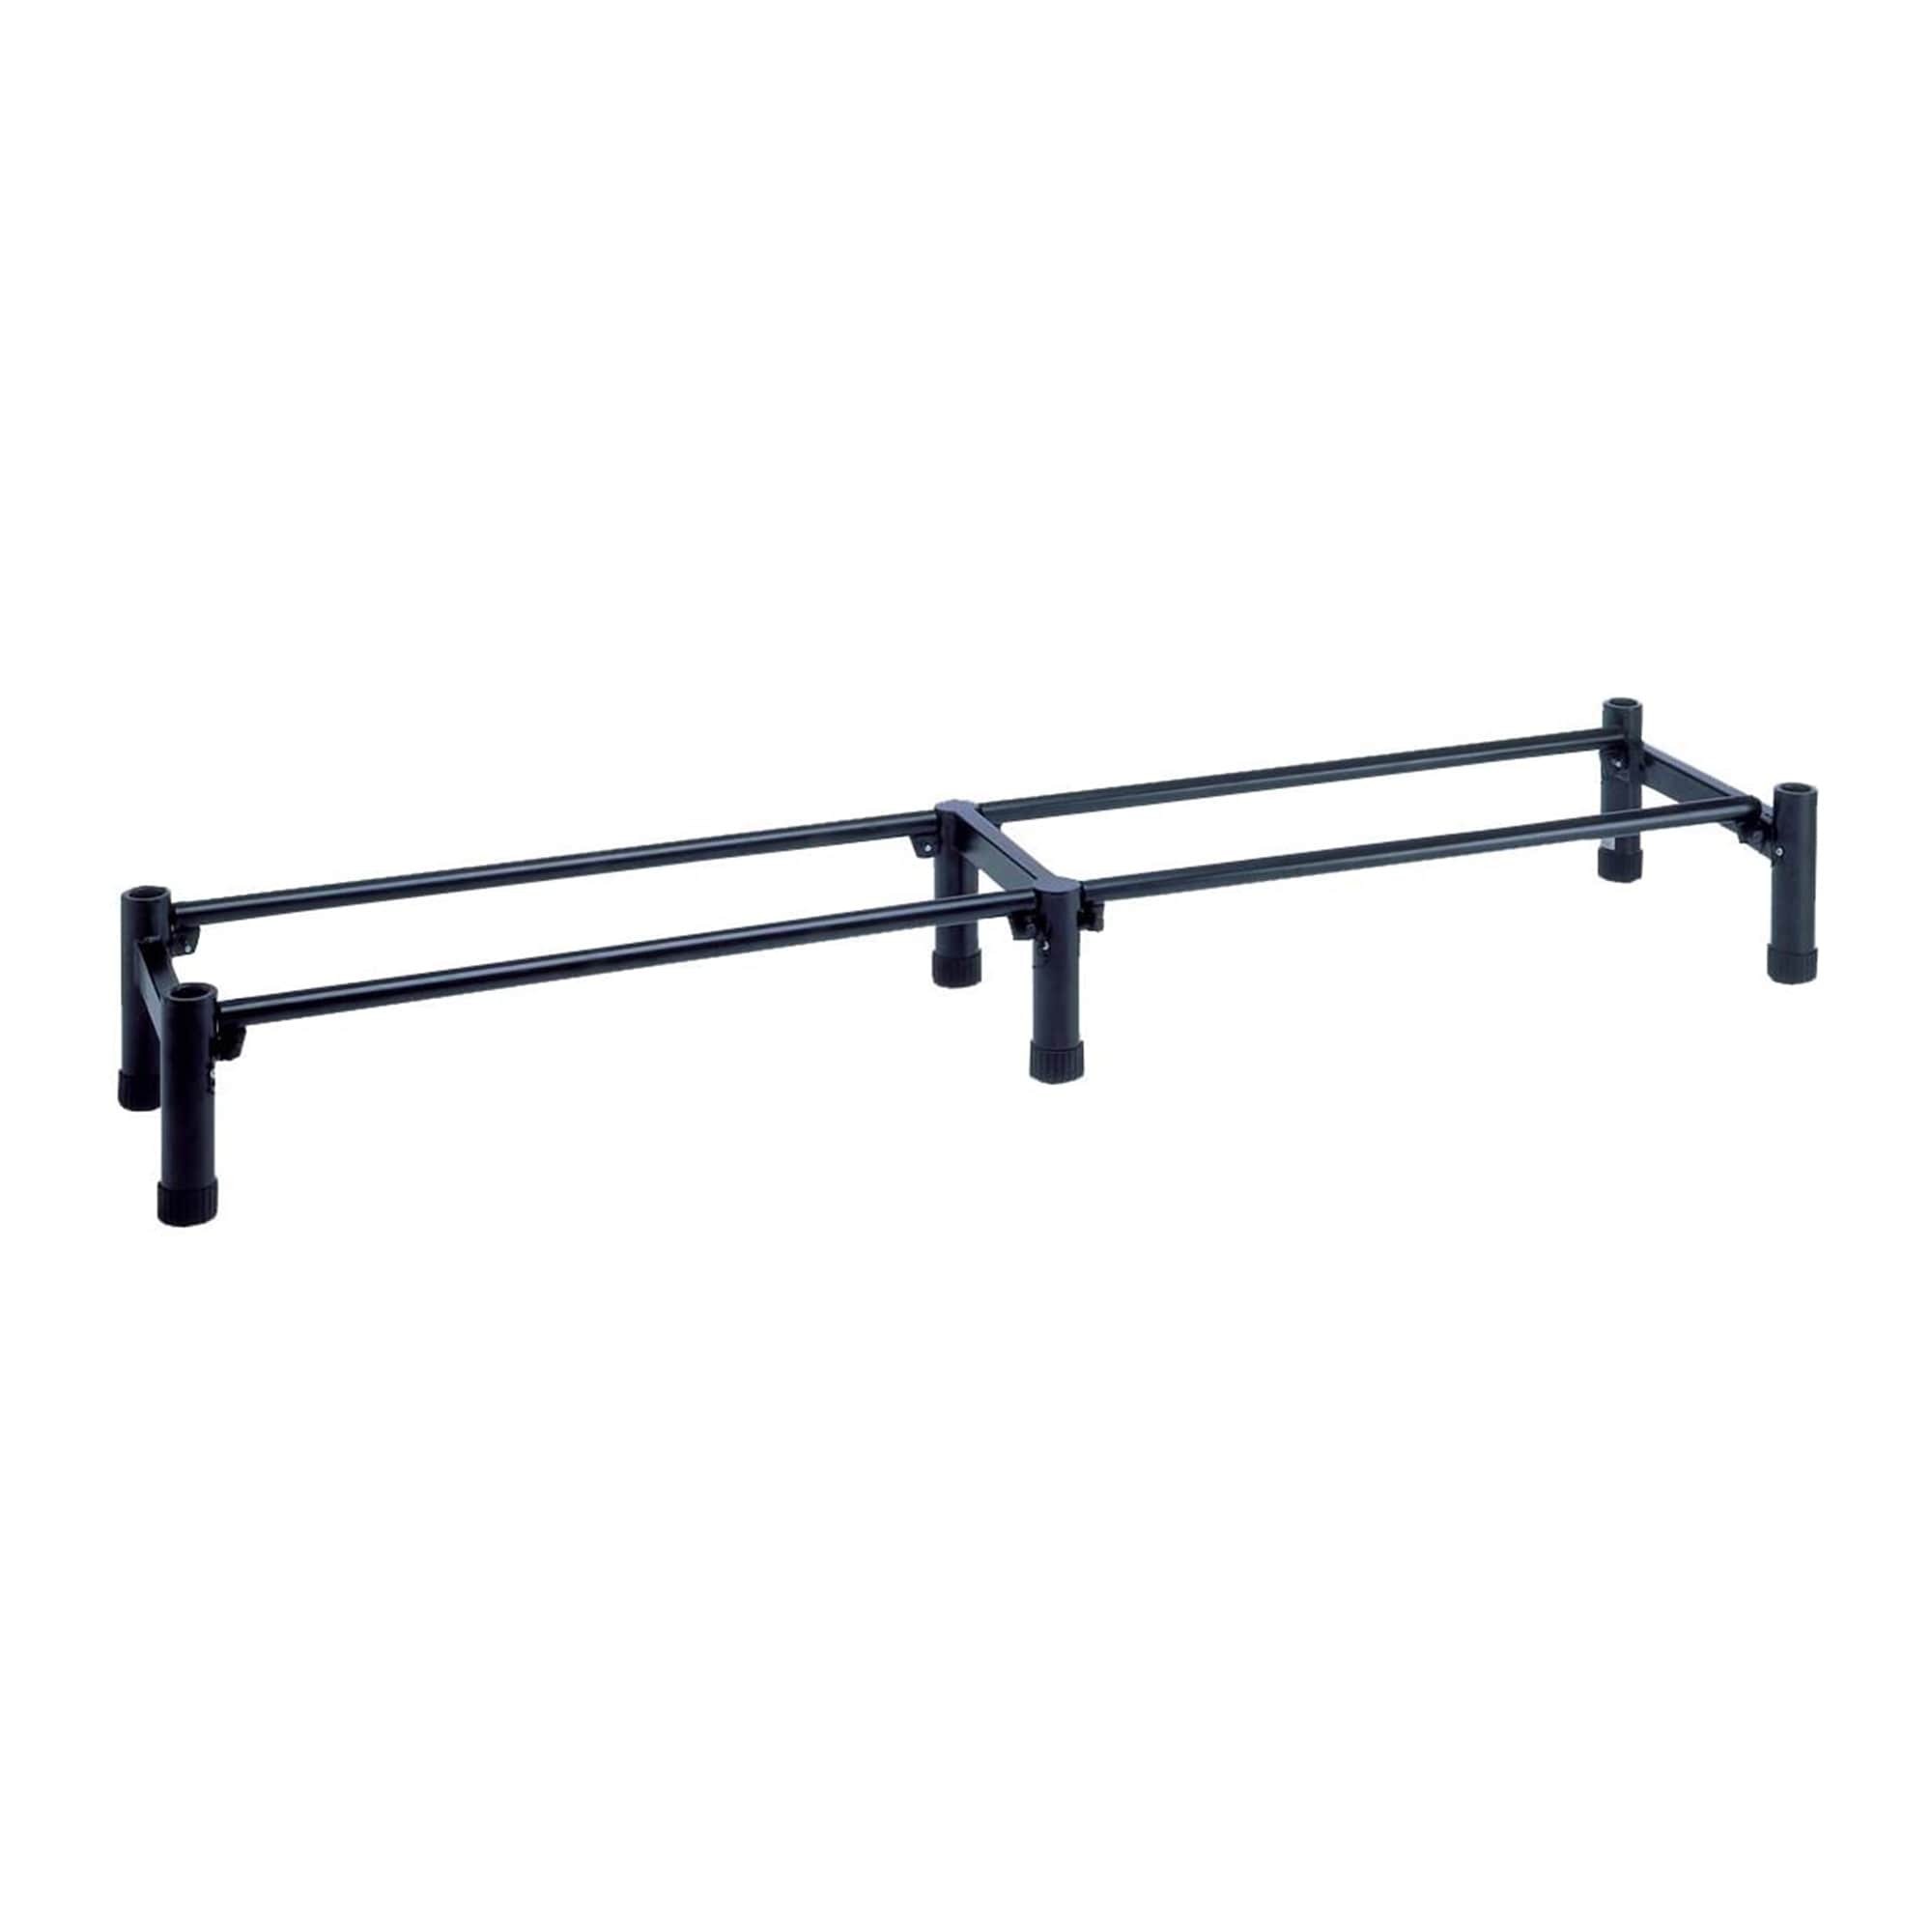 Stamina Products 55-4150 Large Riser Stand For Aeropilates Reformer  Machines - 32 - On Sale - Bed Bath & Beyond - 35732957